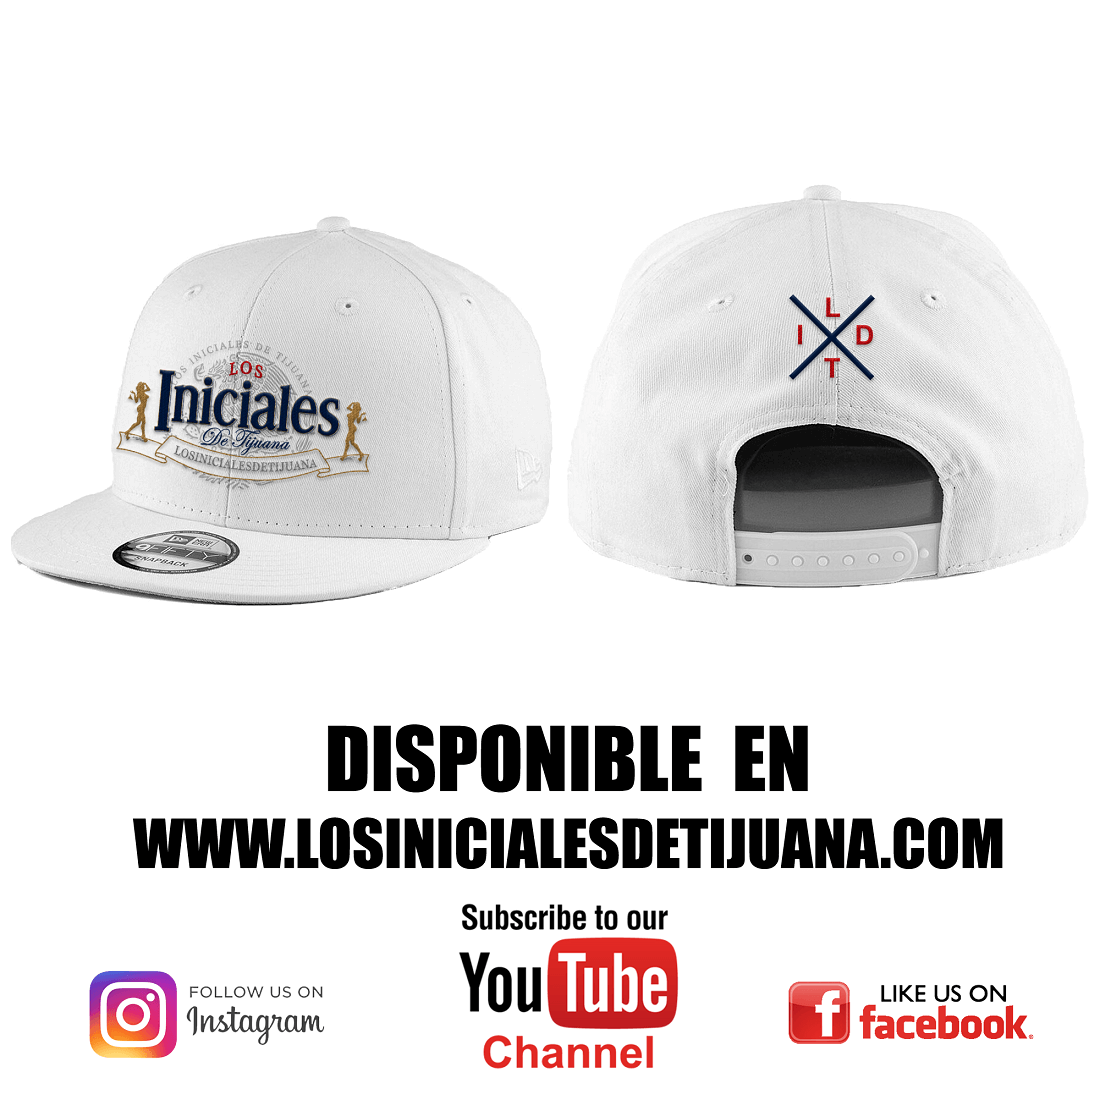 Los Iniciales White Hats